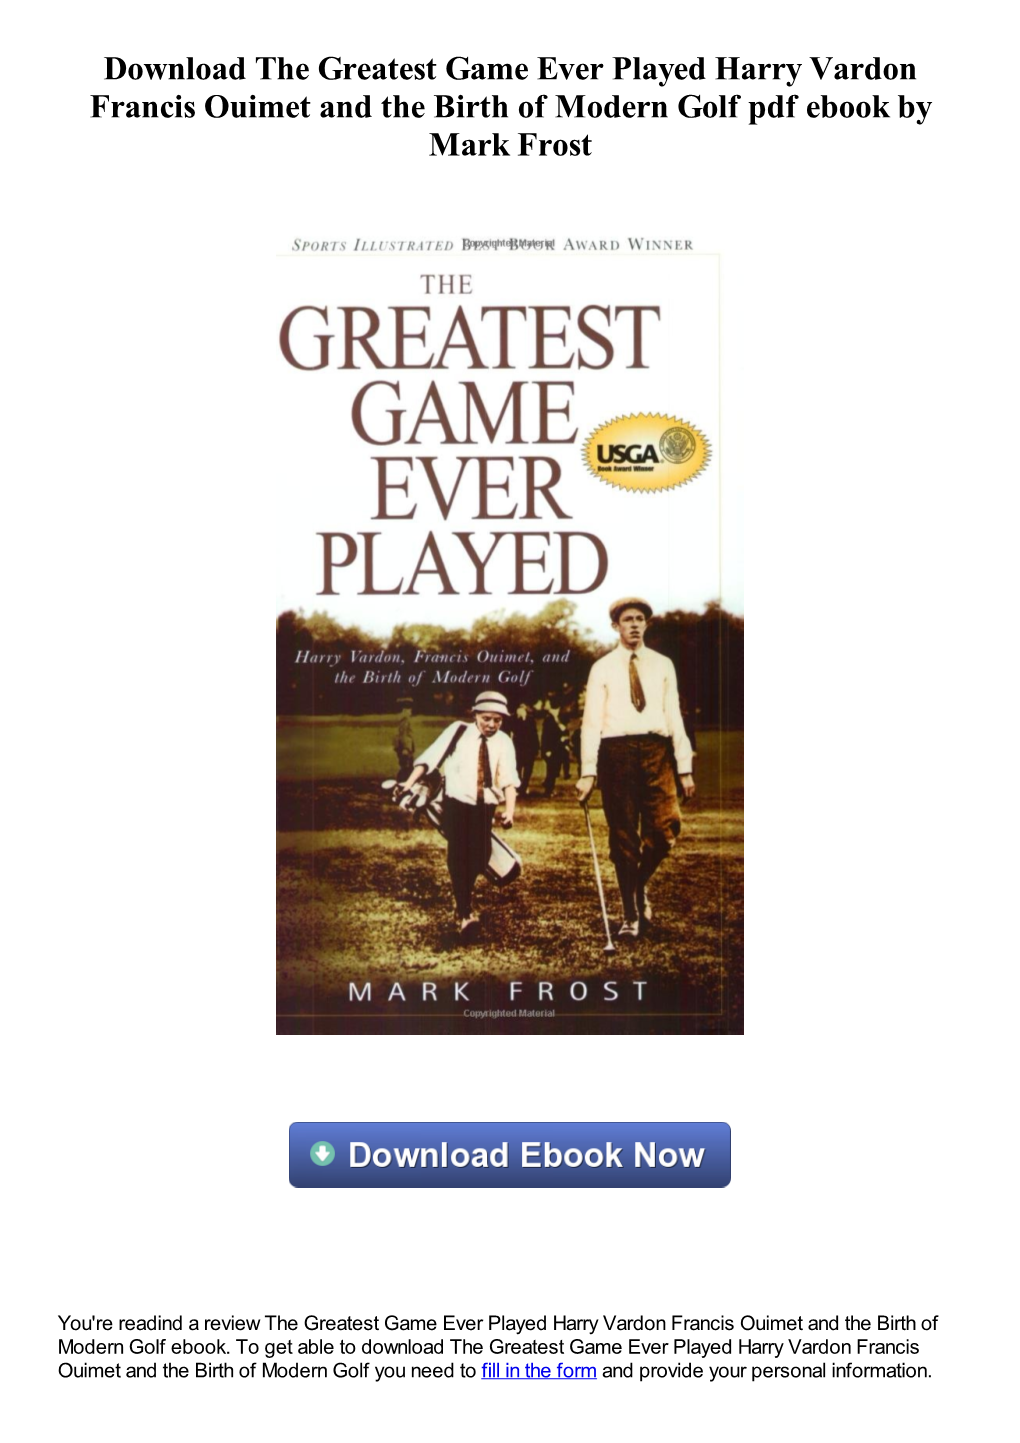 Download the Greatest Game Ever Played Harry Vardon Francis Ouimet and the Birth of Modern Golf Pdf Ebook by Mark Frost